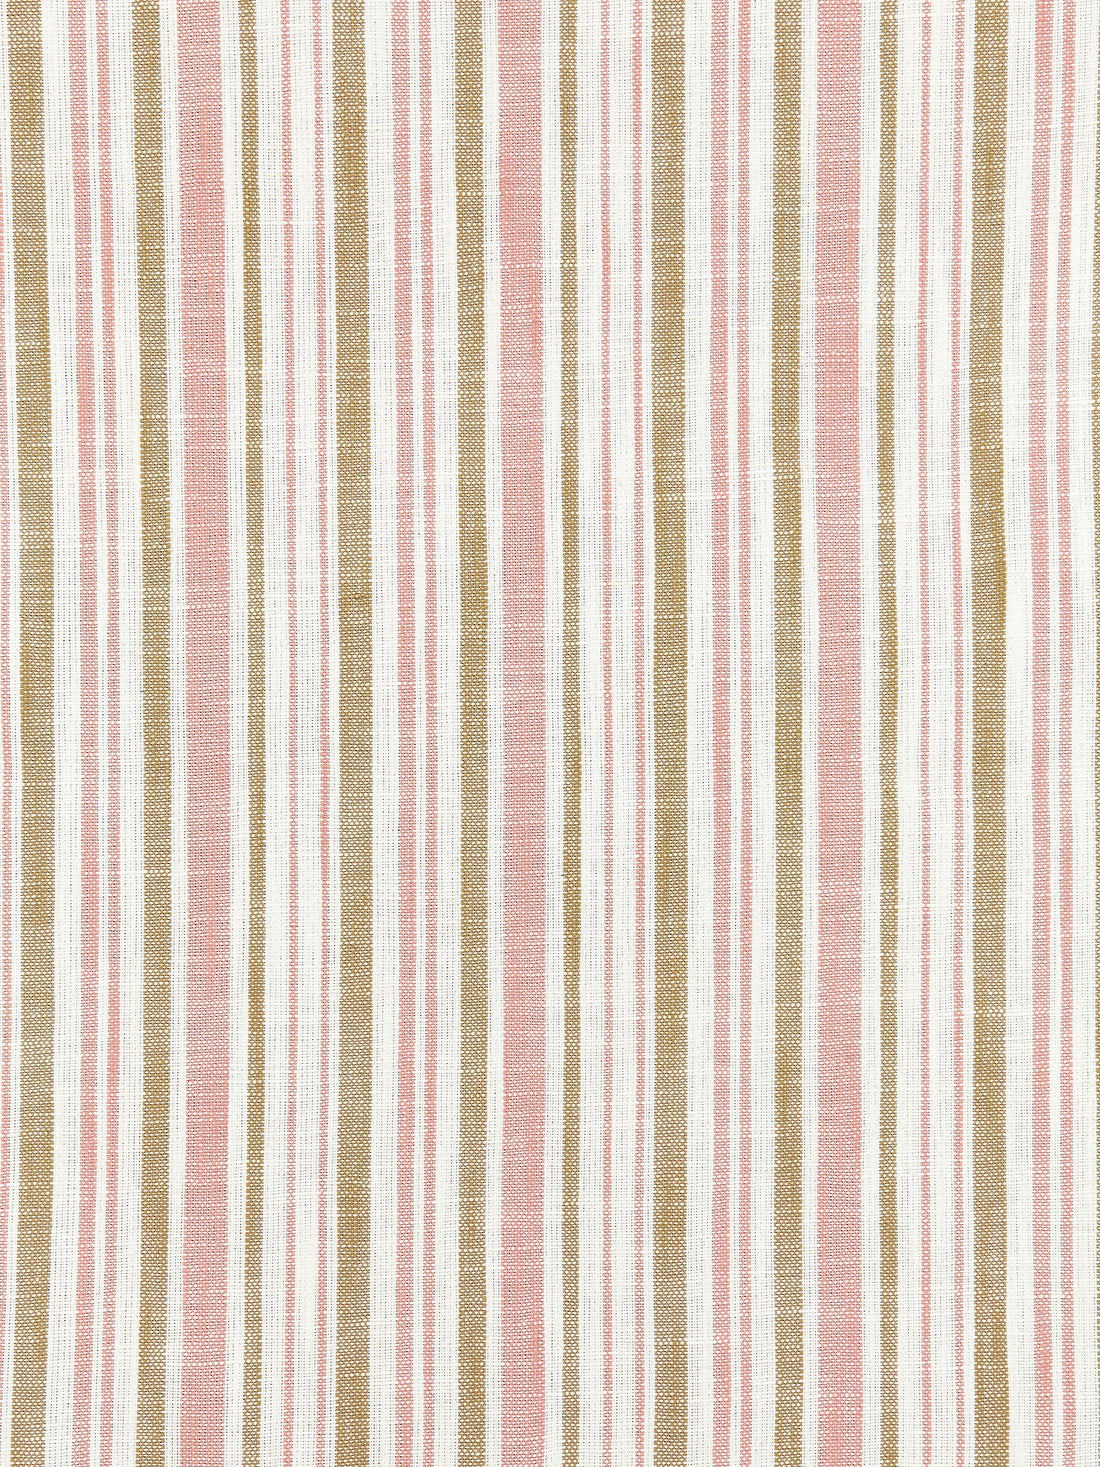 Pembroke Stripe fabric in pink sand color - pattern number SC 000127116 - by Scalamandre in the Scalamandre Fabrics Book 1 collection